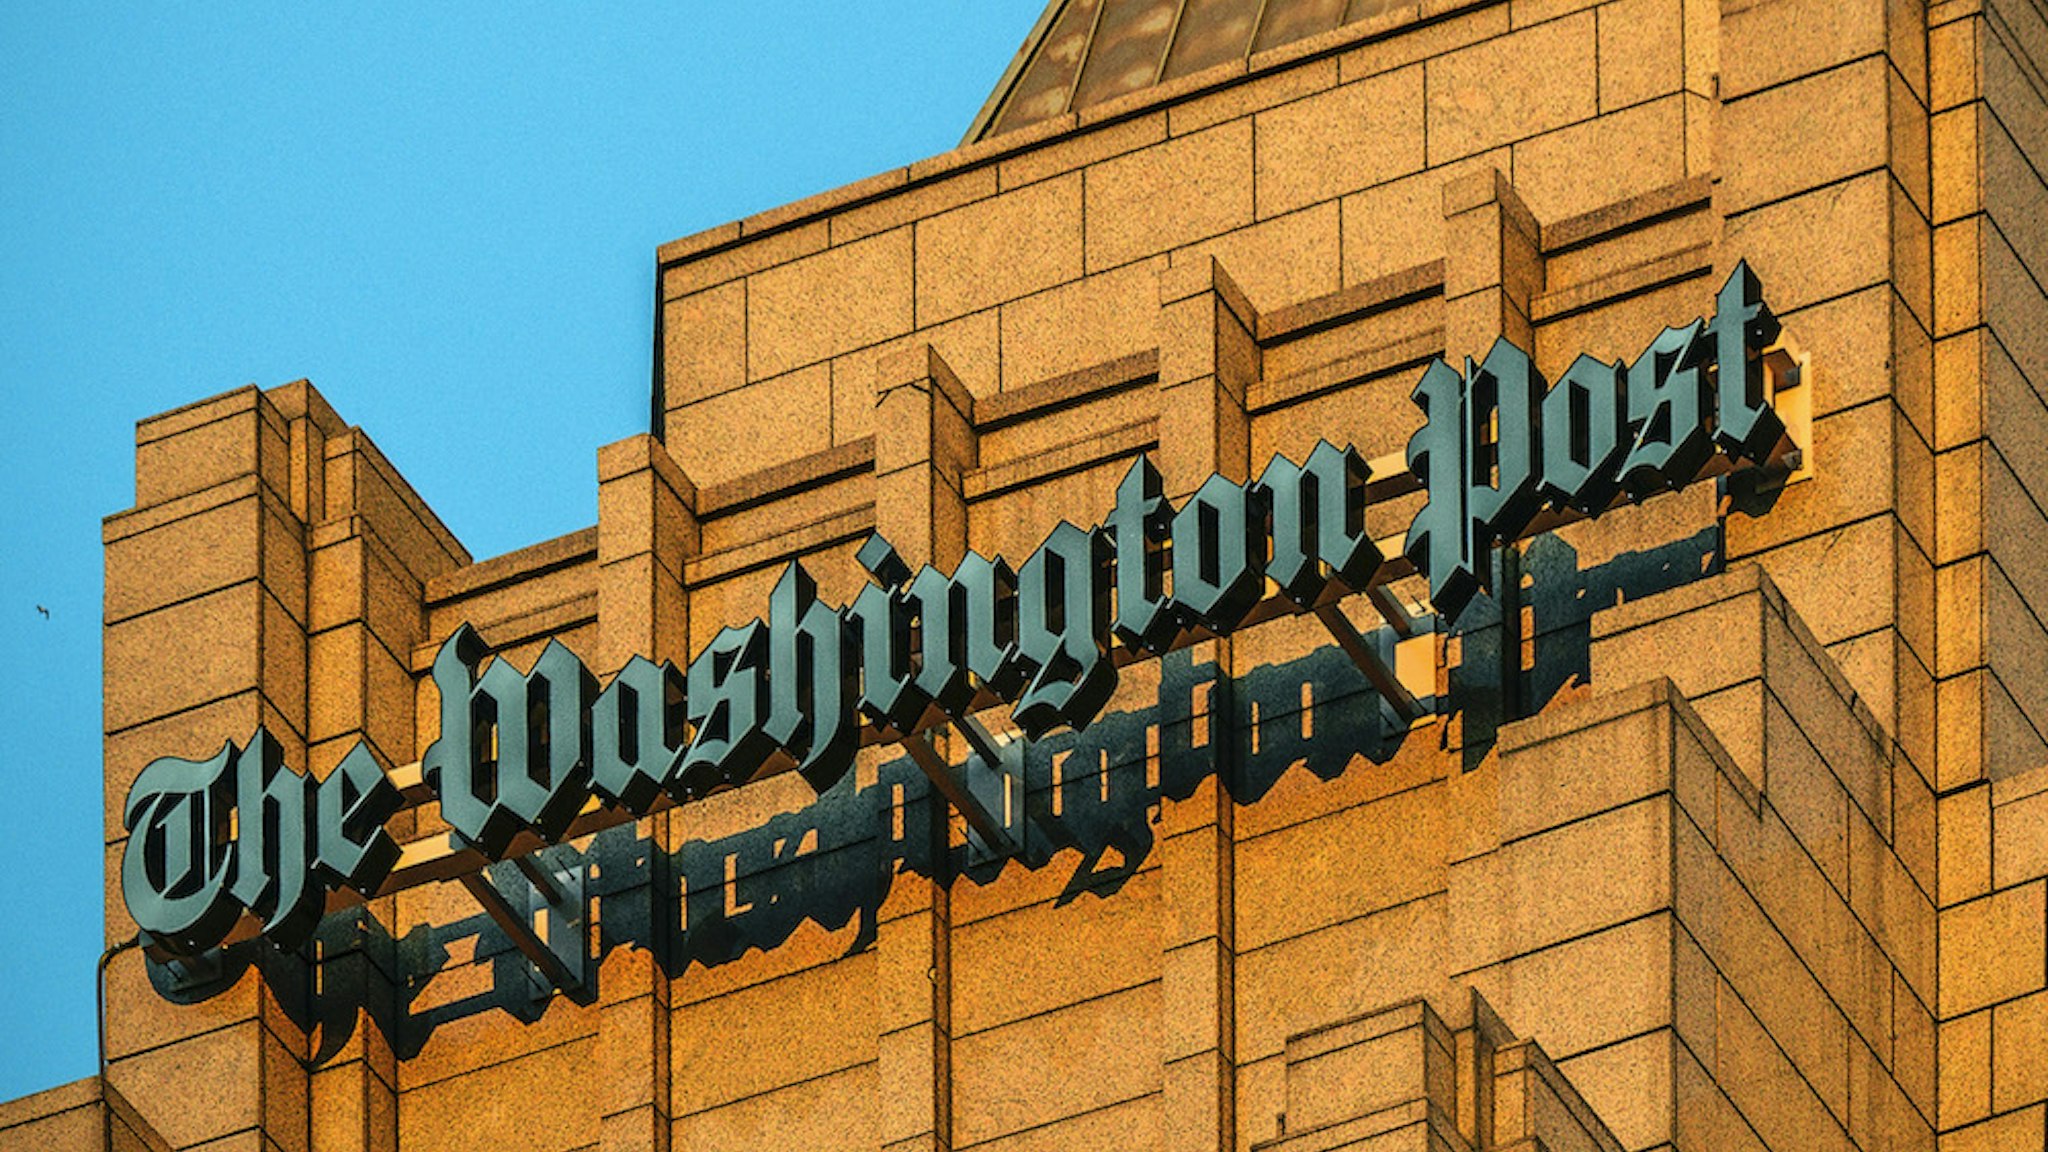 WASHINGTON, DC - DECEMBER 16: A view of the logo on the new home of The Washington Post, on December, 16, 2015 in Washington, DC. (Photo by Bill O'Leary/The Washington Post)